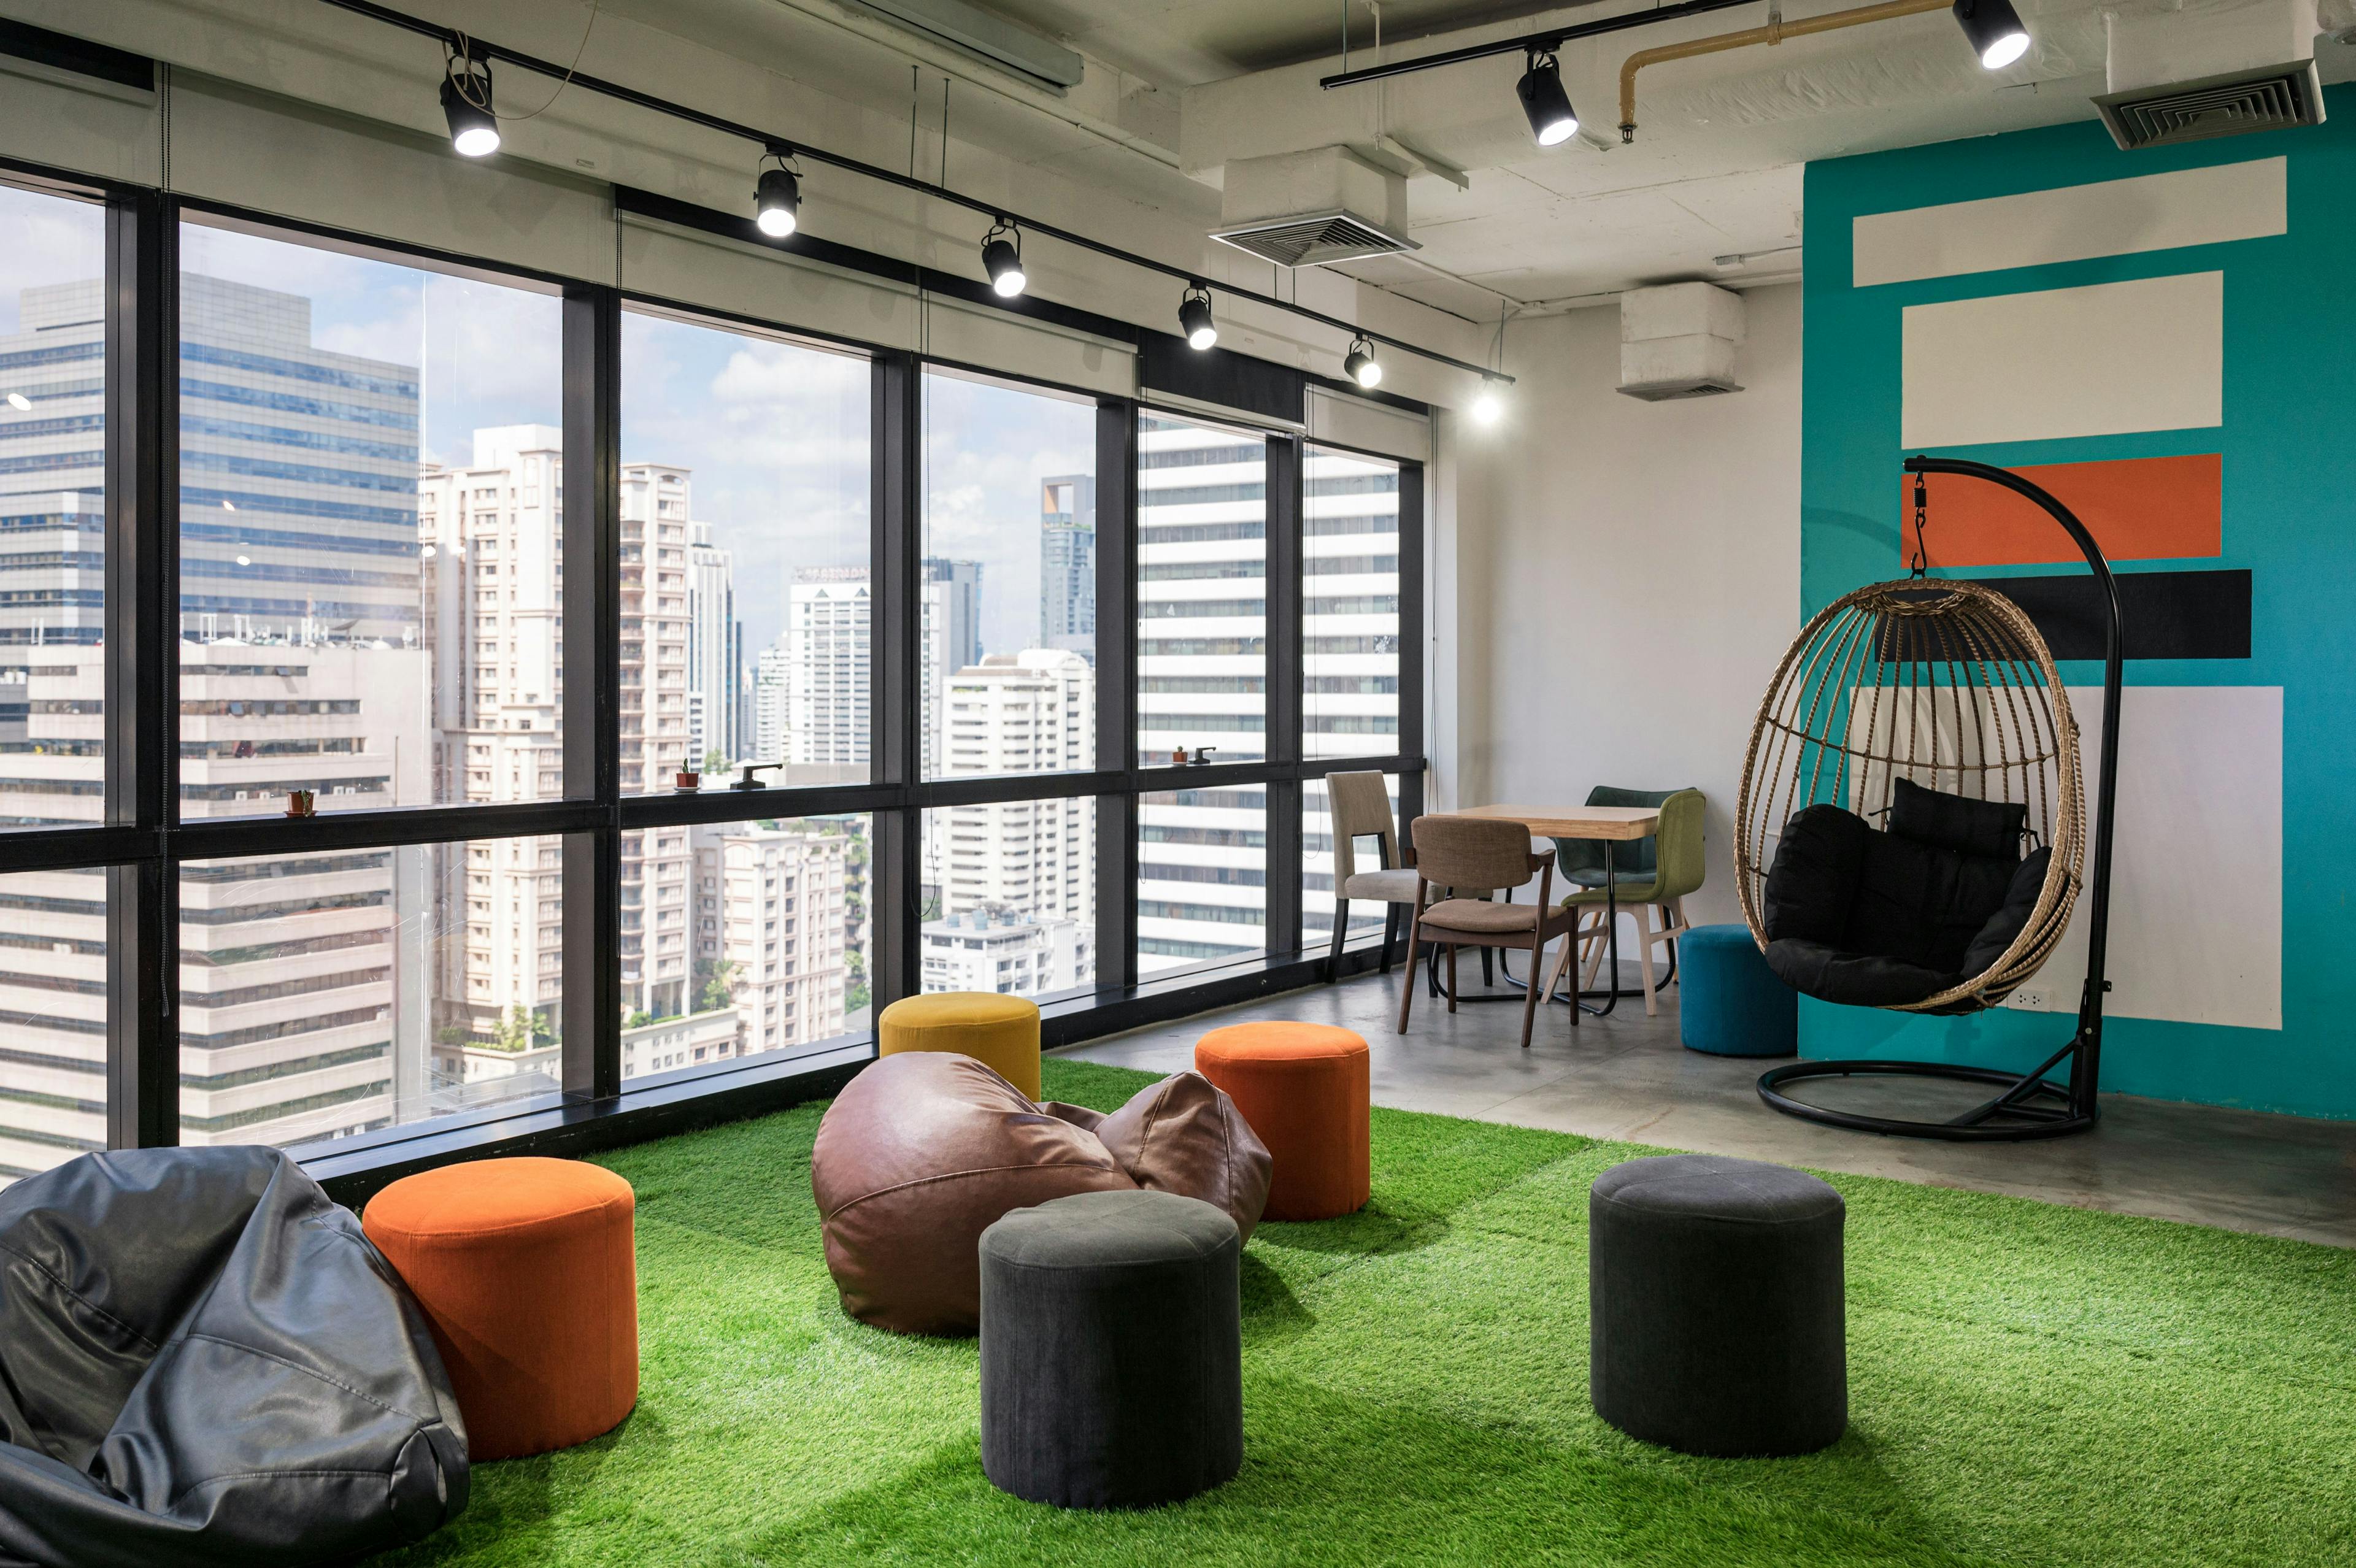 creative-room-coworking-space-with-cushions-chairs-artificial-grass-modern-office